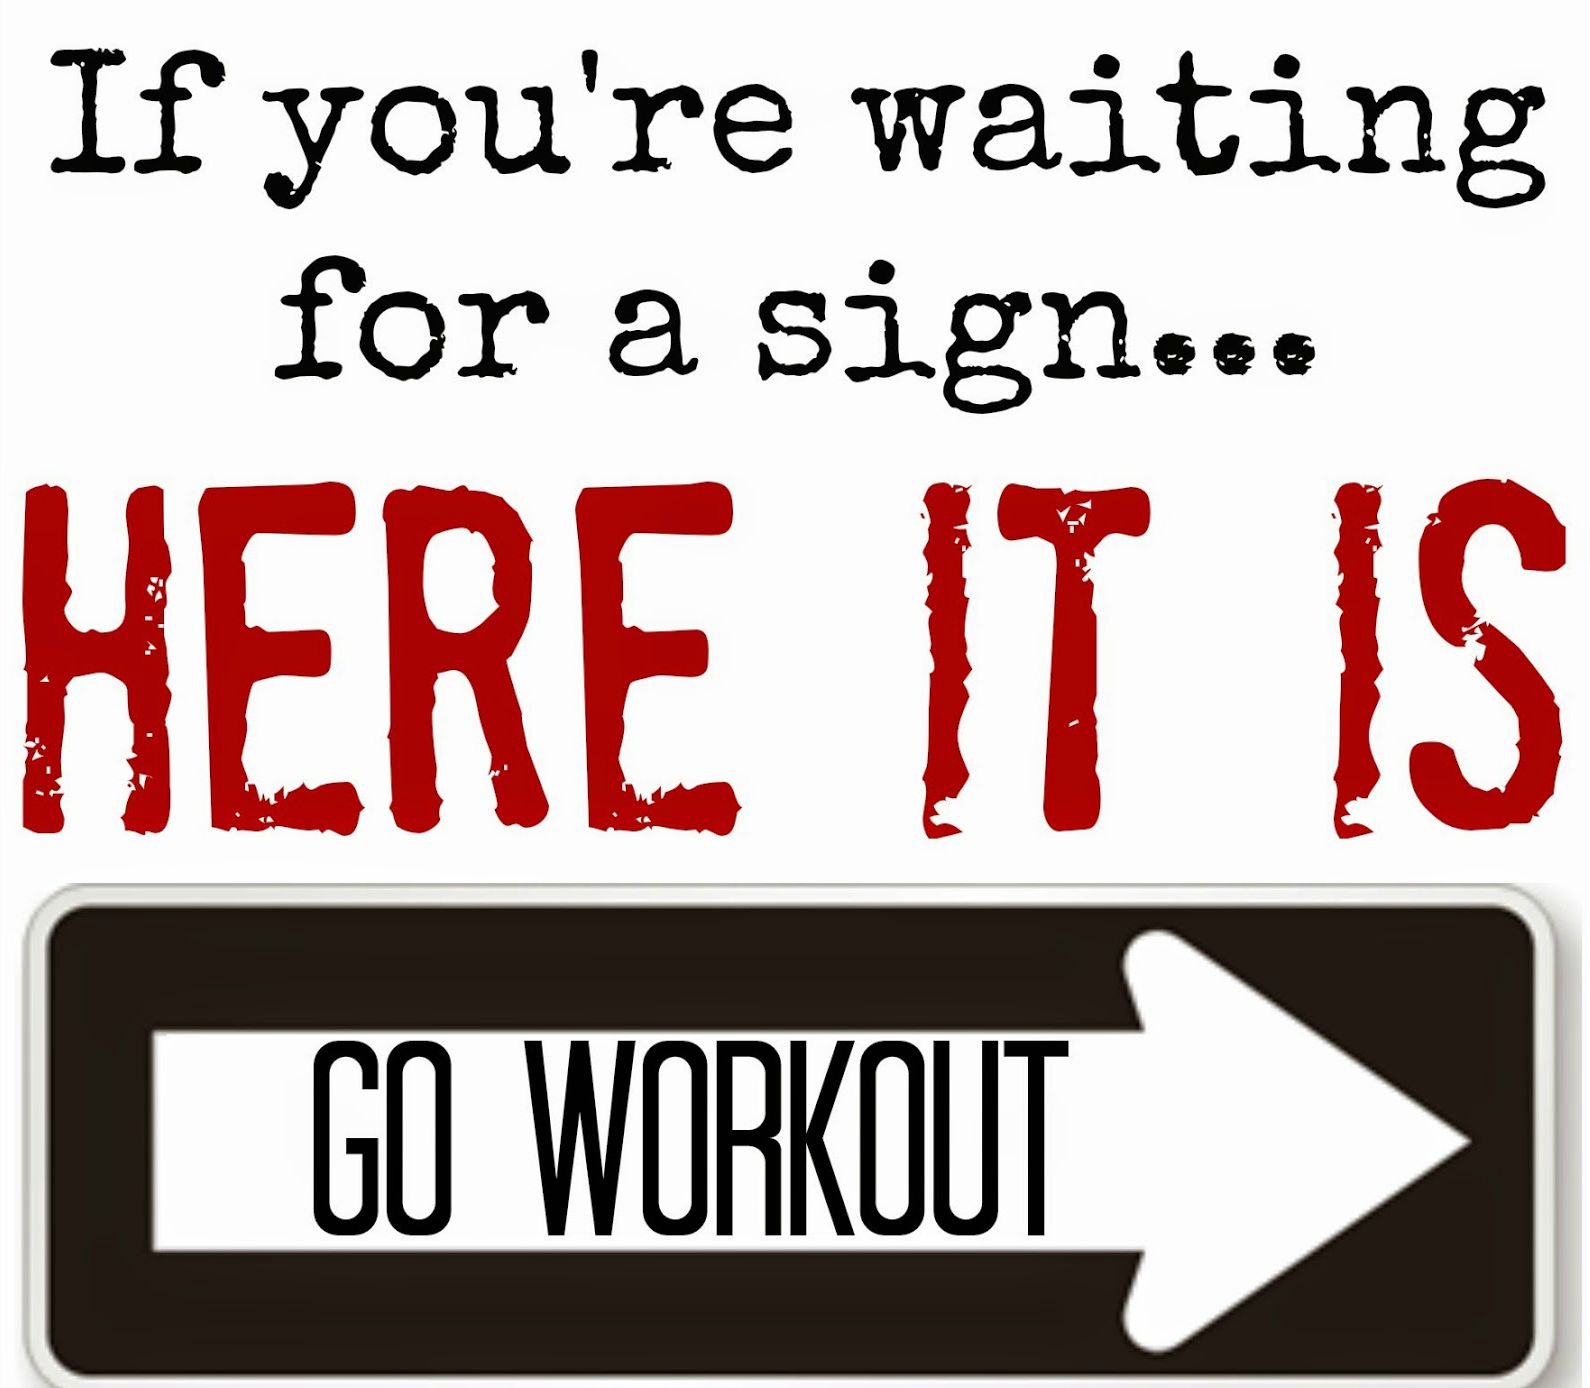 fitness-motivation-gym-inspiration-quote-saying-meme-workout-tone-and-tighten-waiting-for-a-sign